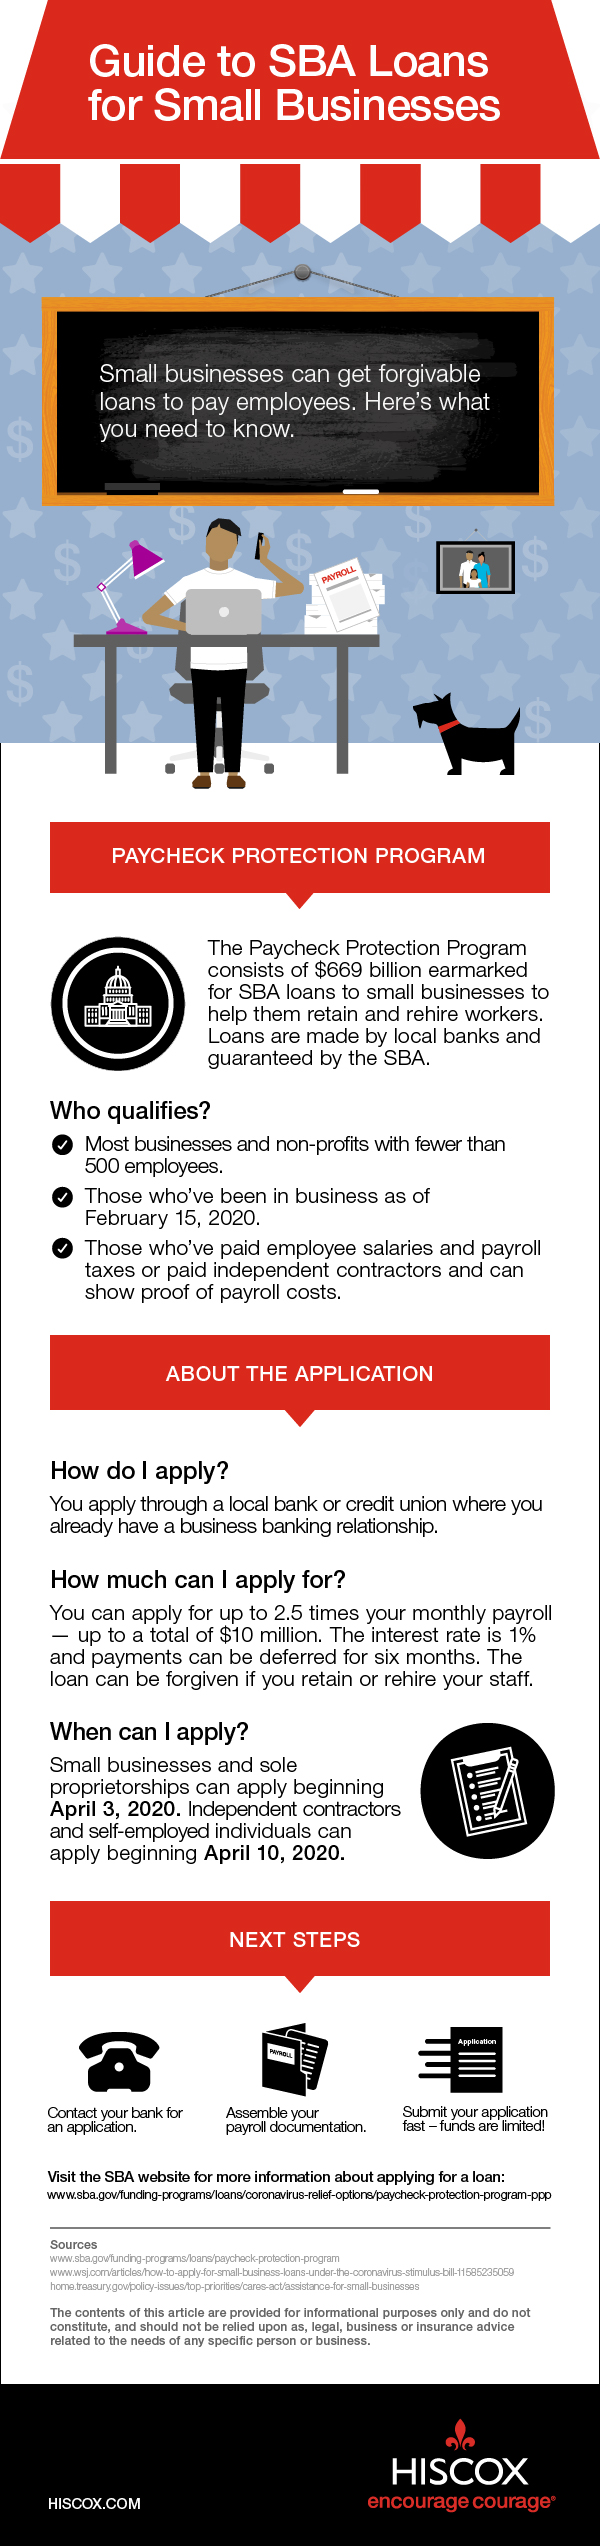 SBA loan infographic. CARES Act. PPP (paycheck protection program).